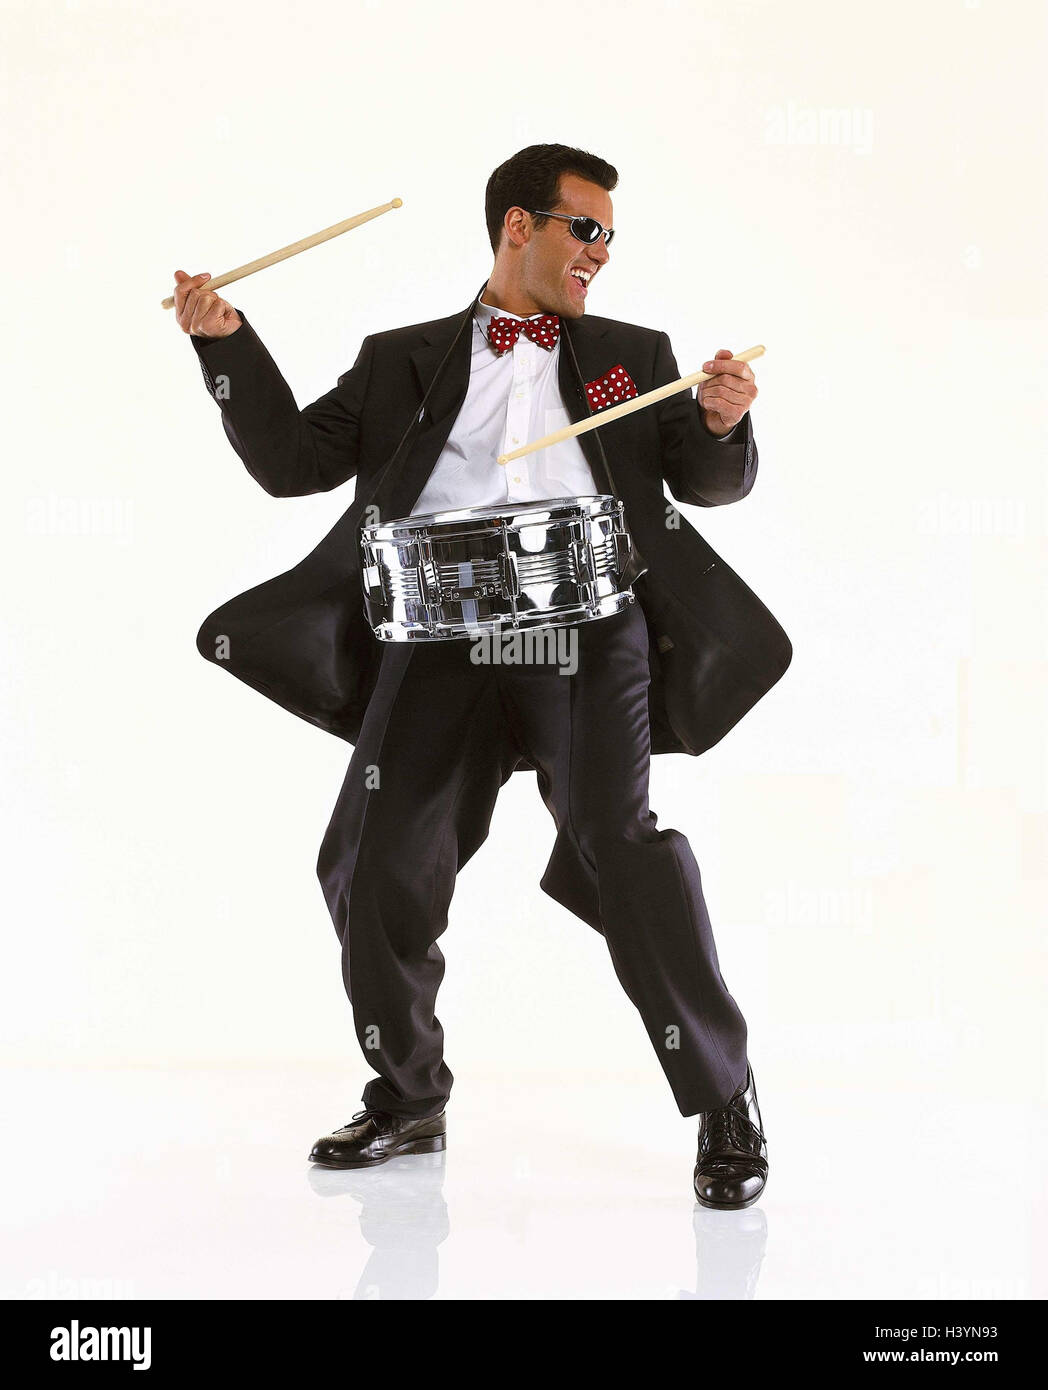 Man, young, suit, sunglasses, music, Tommeln Men, cut outs, studio, drummer, drum, drumsticks, Sticks, hit, drummer, music, musician, enthusiastically, action, melted, enthusiasm, percussion instrument, instrument, musical instrument Stock Photo